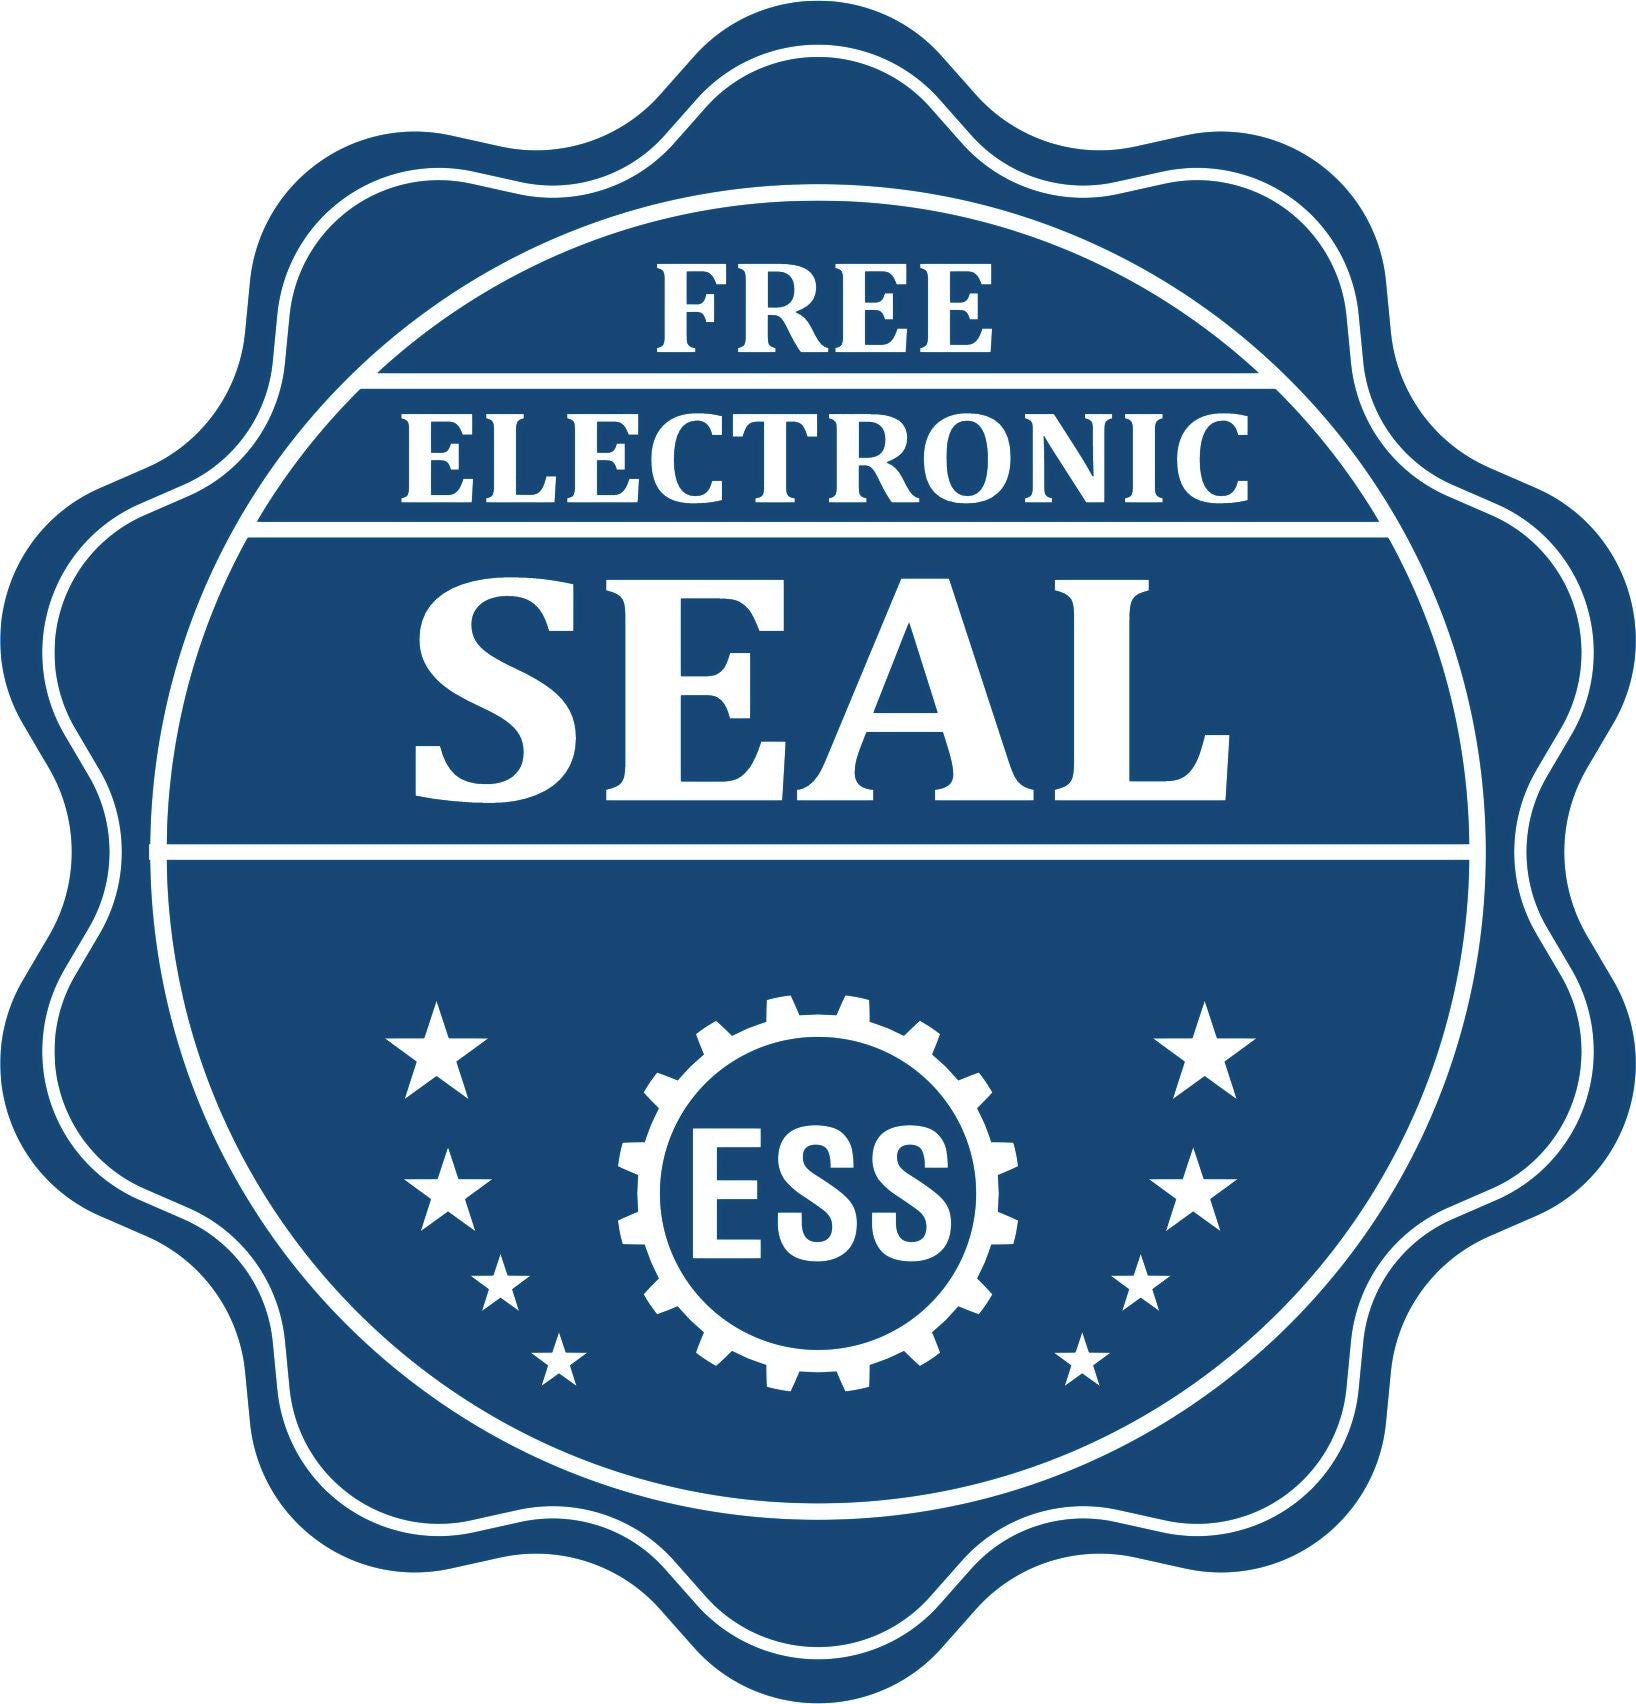 A badge showing a free electronic seal for the Connecticut Desk Surveyor Seal Embosser with stars and the ESS gear on the emblem.